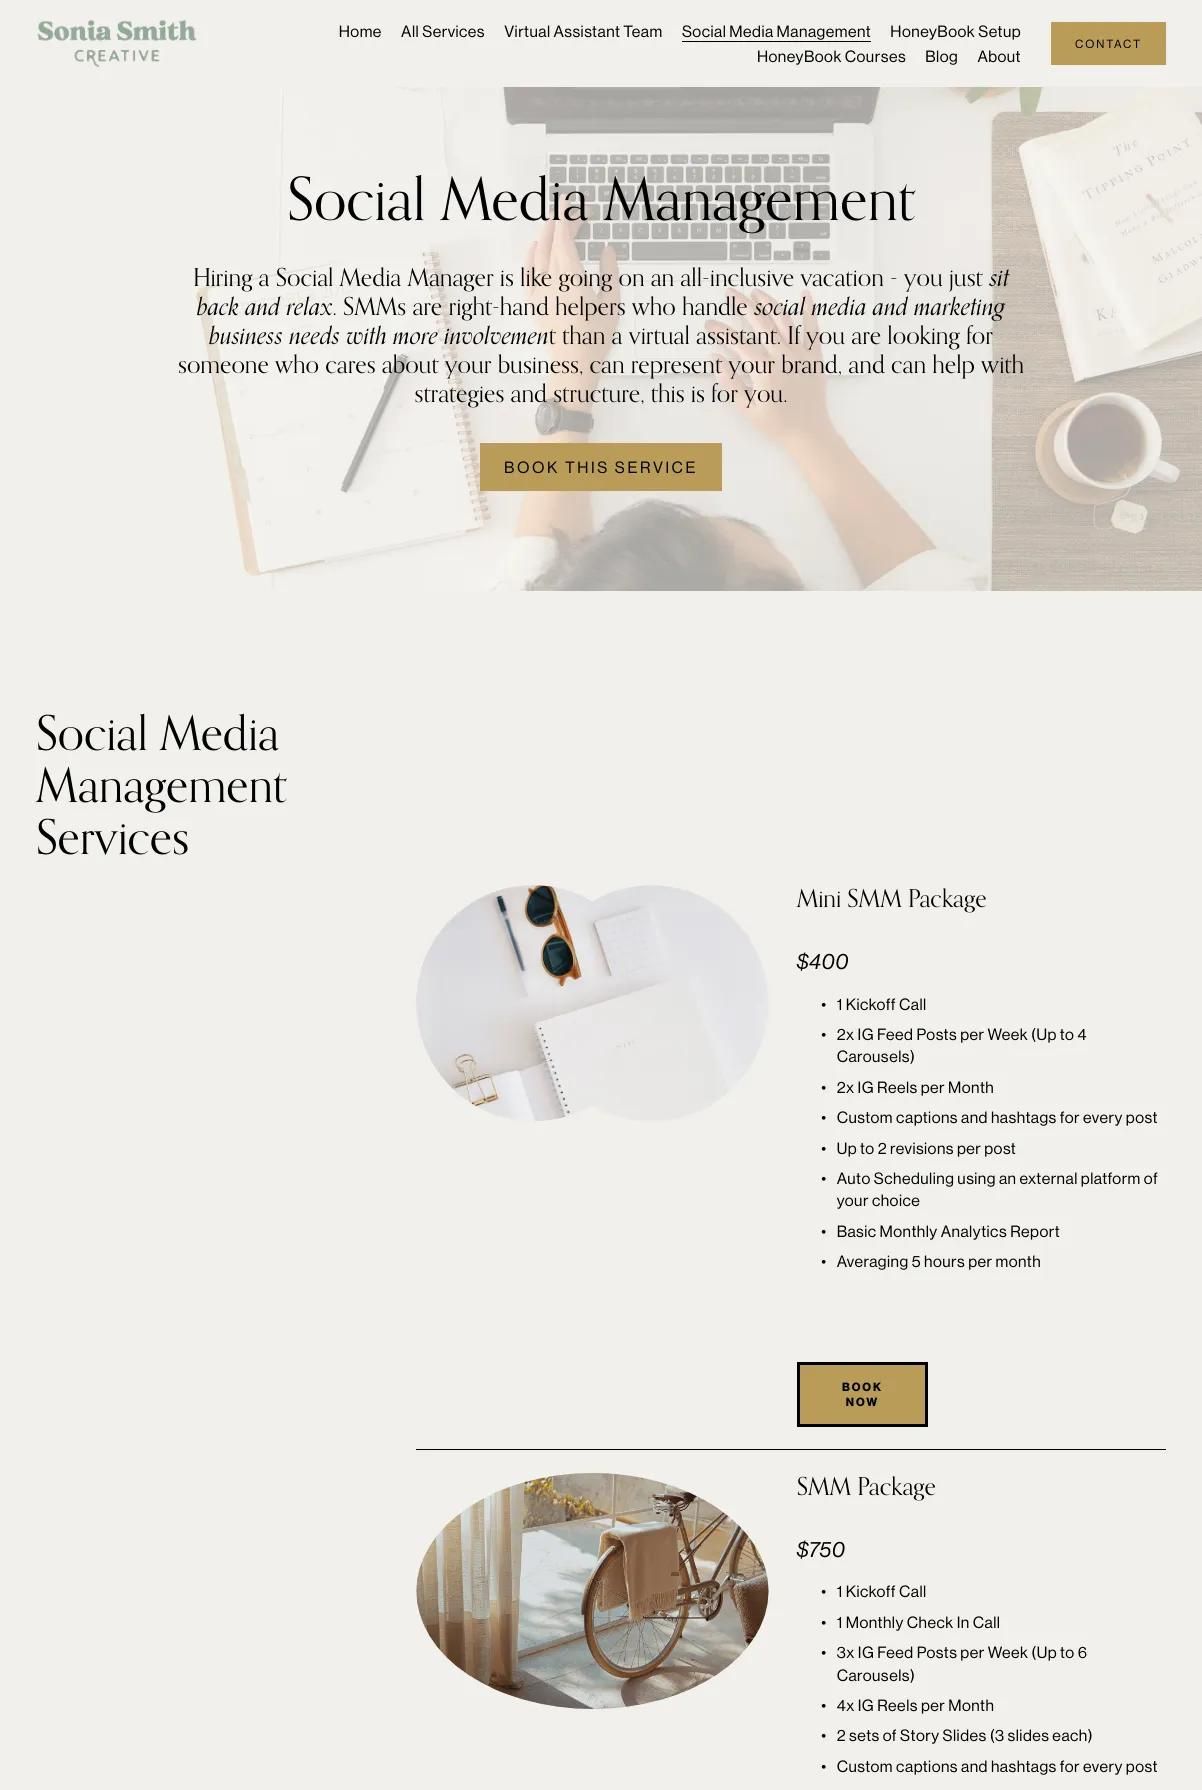 Screenshot 3 of Sonia Smith Creative (Example Squarespace Virtual Assistant Website)